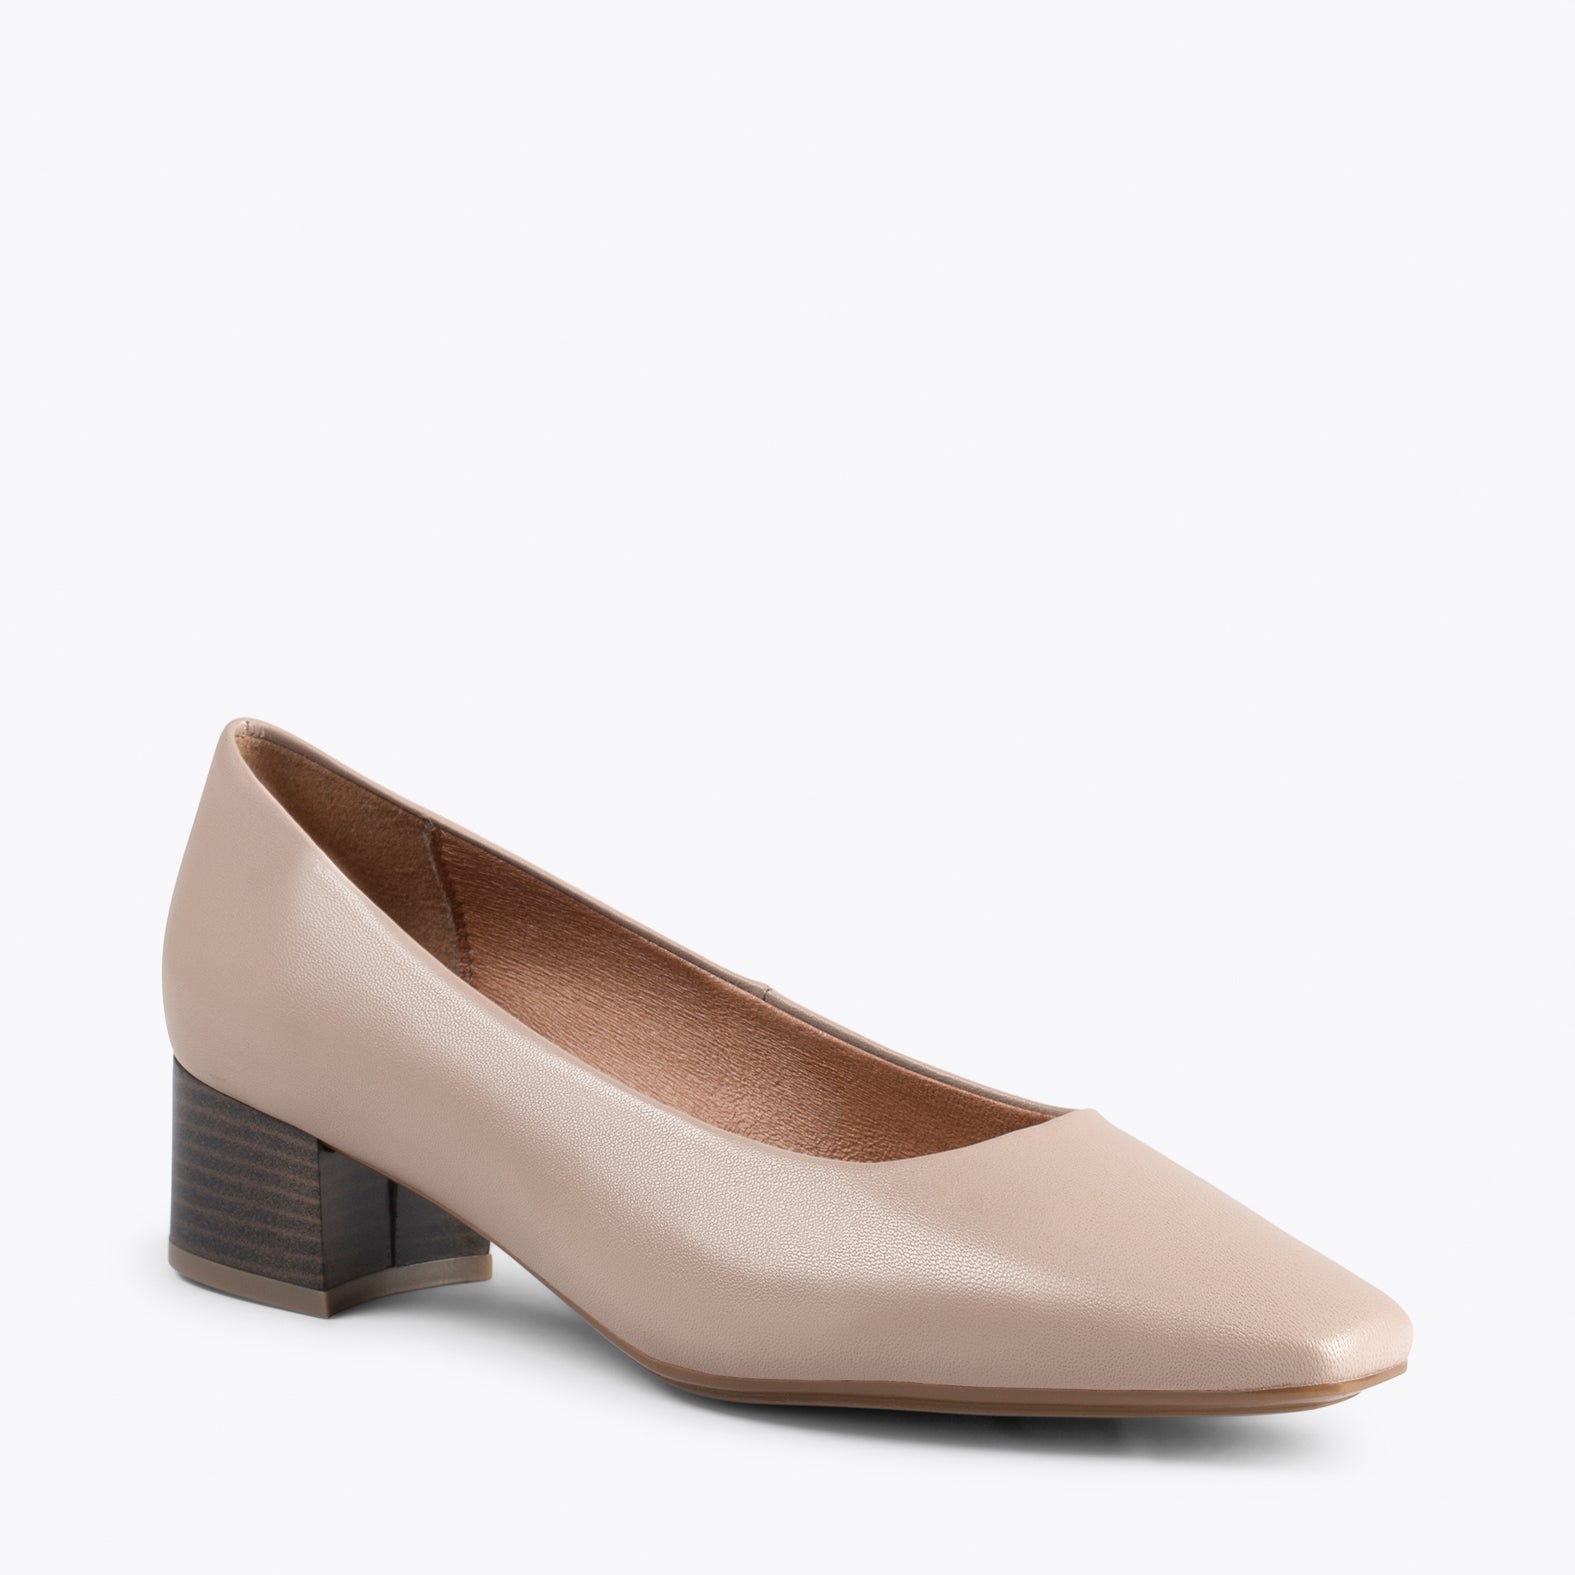 URBAN LADY – TAUPE nappa leather low heels